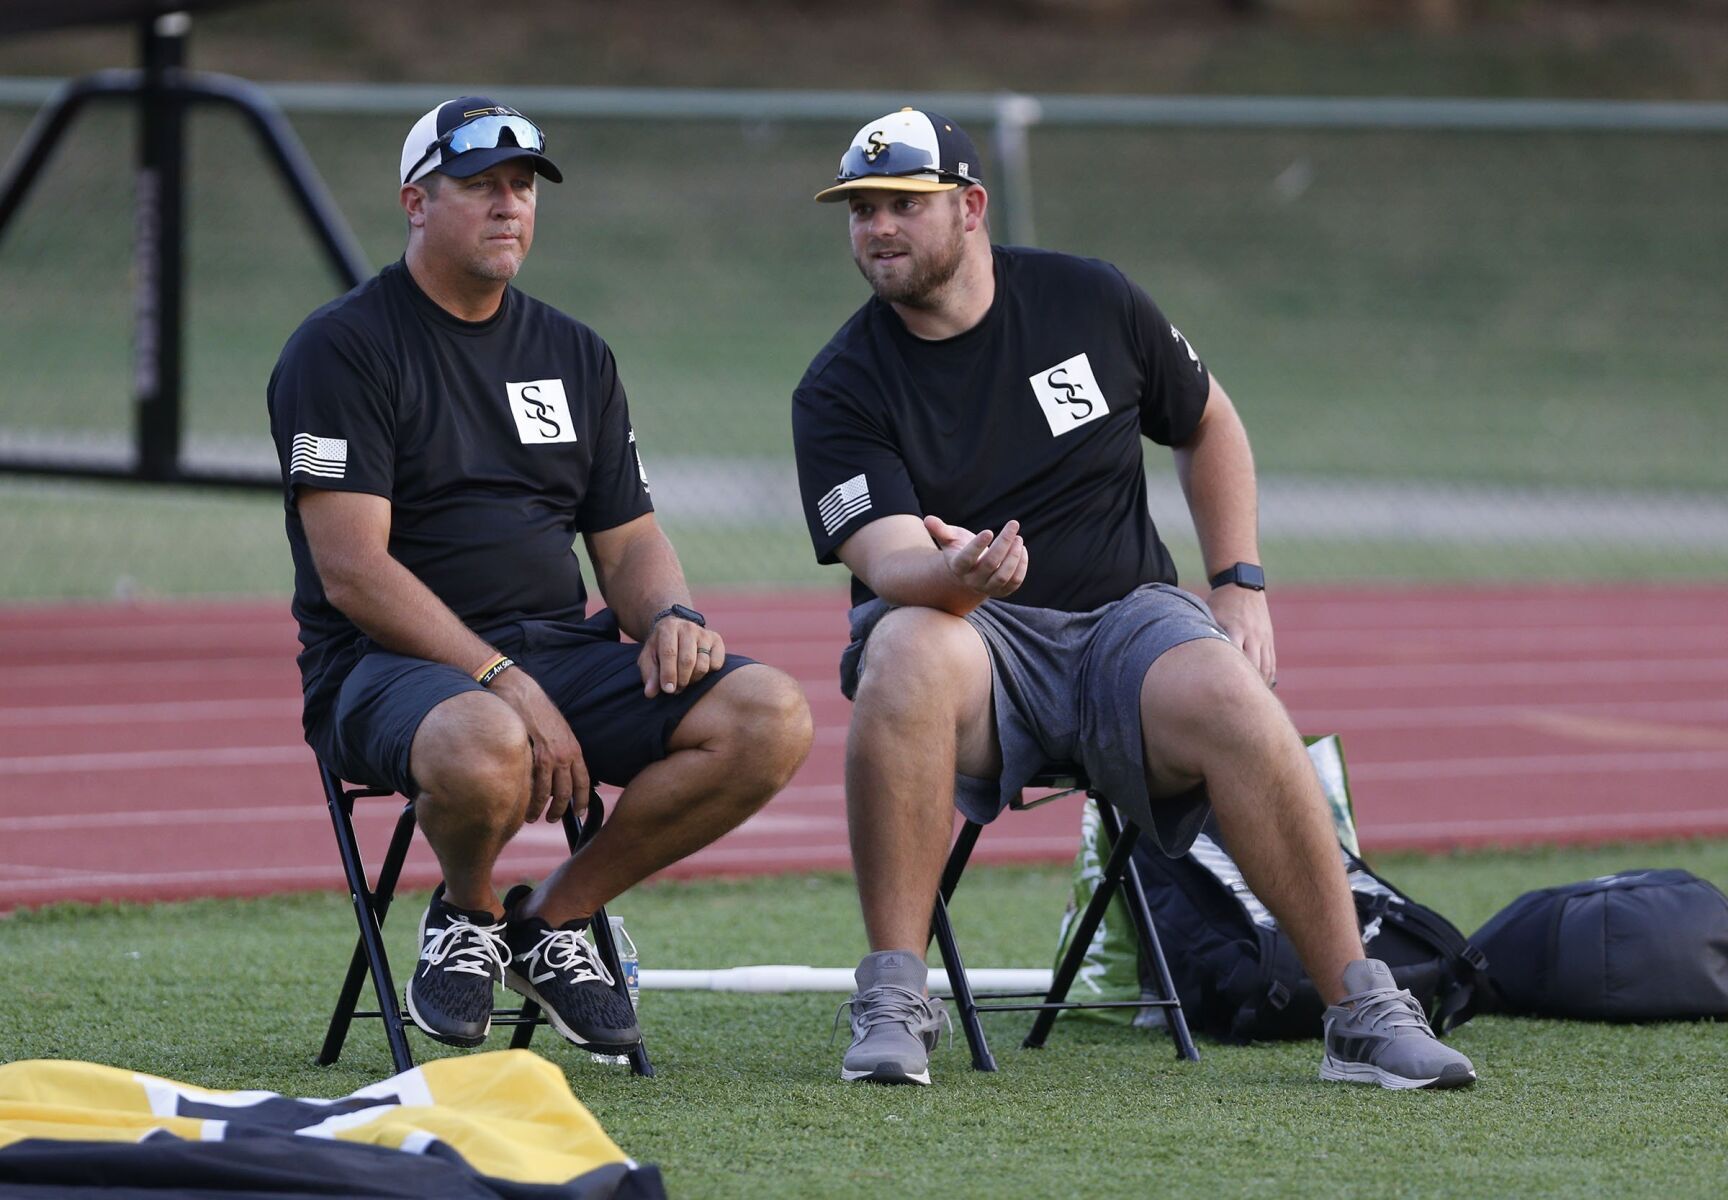 Scott Watkins promoted to lead Sand Springs baseball team after state title run